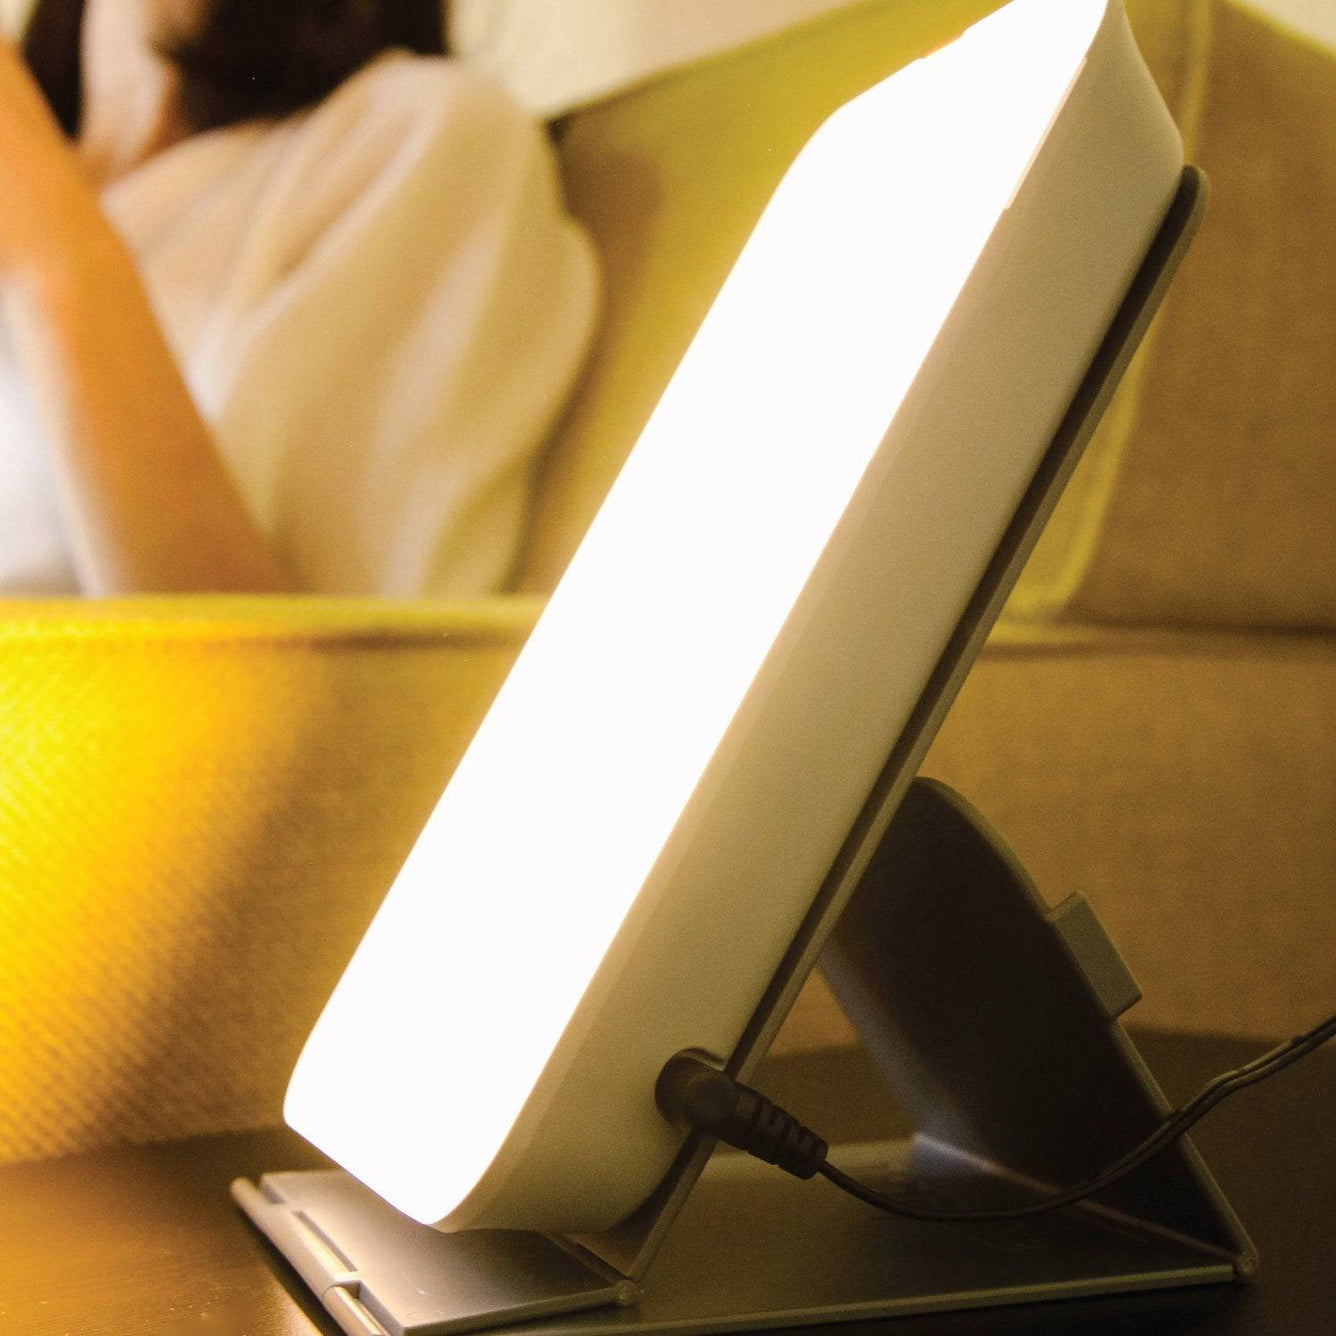 TheraLite 10,000 LUX Mood and Energy Enhancing Bright Light Therapy Lamp - Carex Health Brands